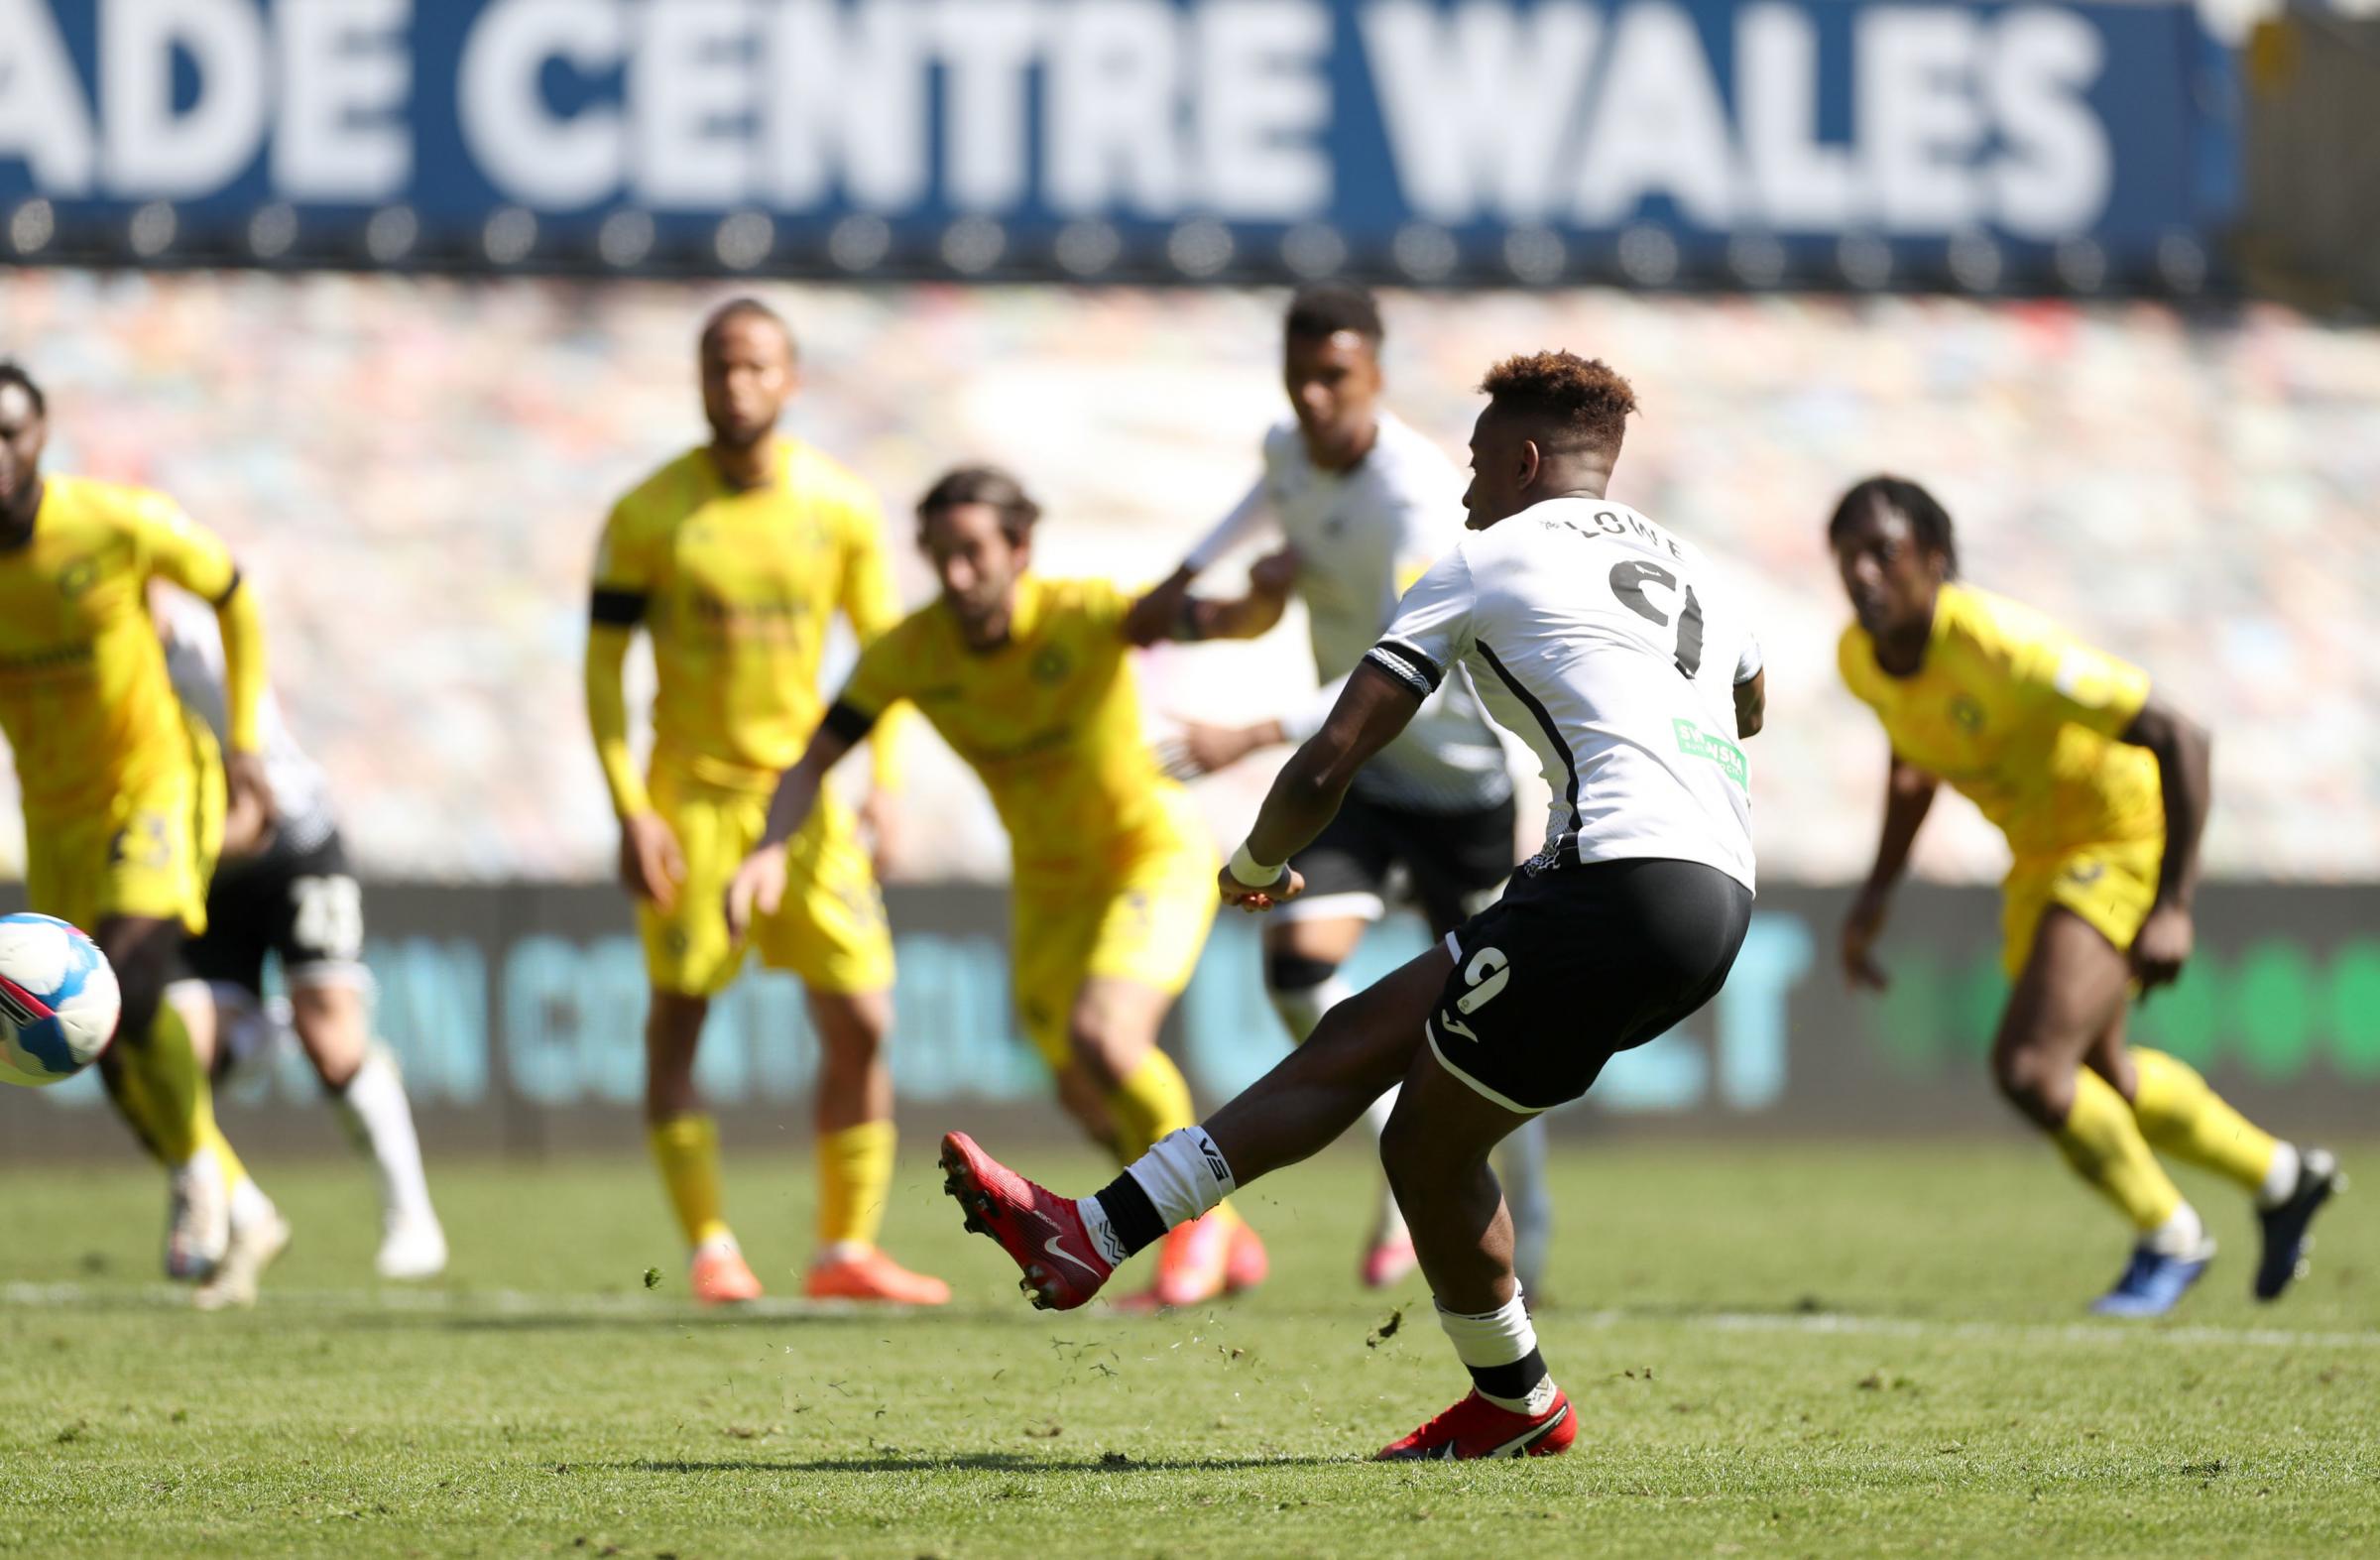 Jamal Lowe scored a penalty to give Swansea hope against Wycombe (Bradley Collyer/PA)